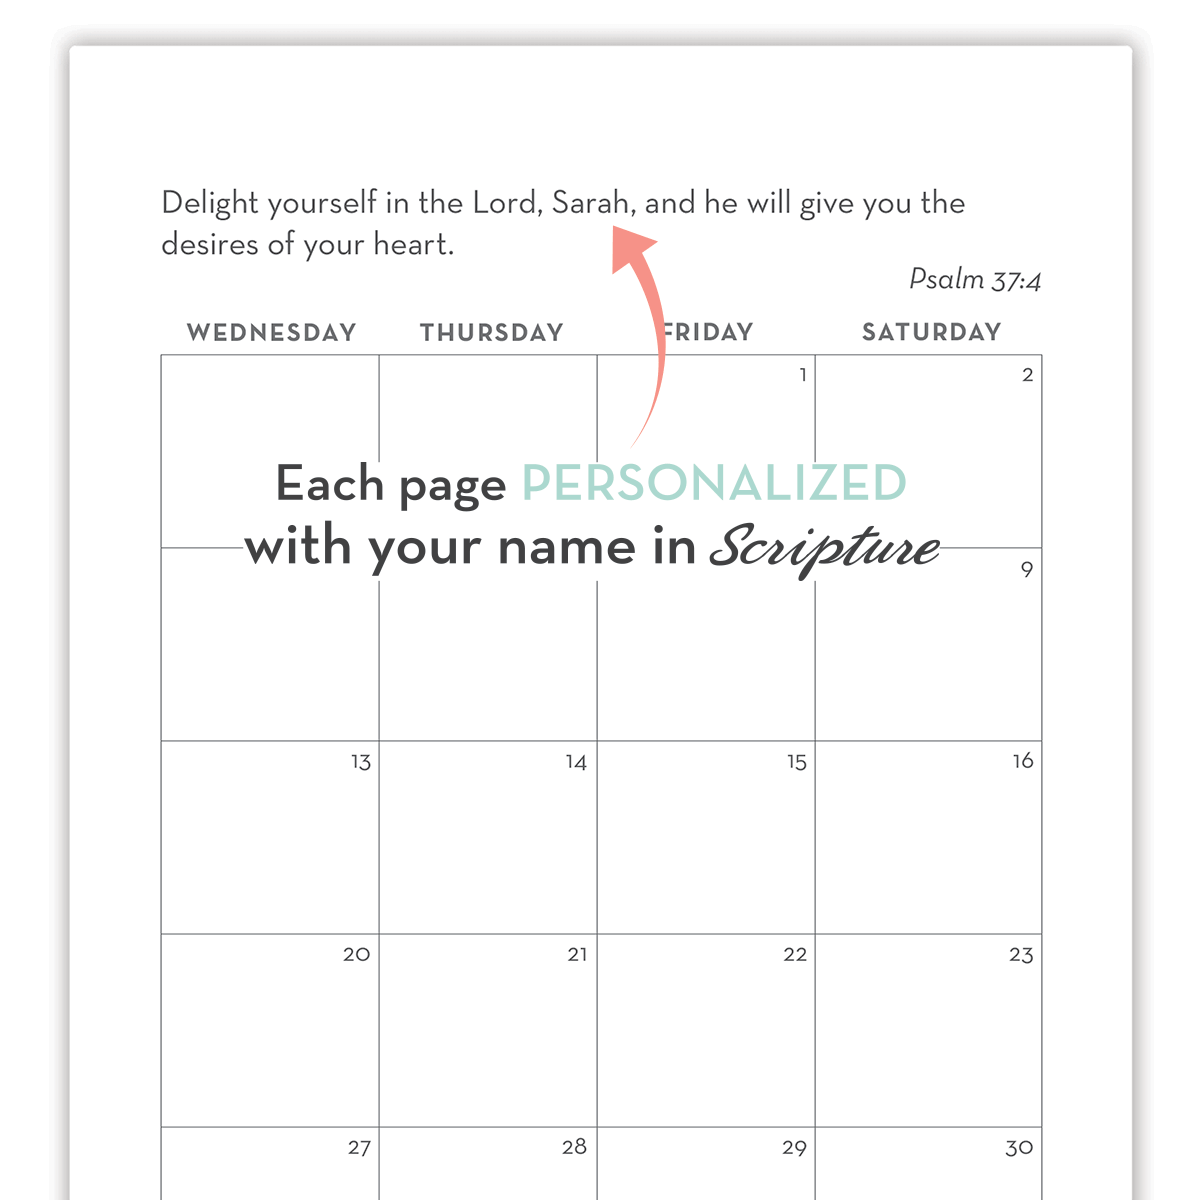 personalized bible planner, personalized scripture planner, christian journal, bible planner, unique christian gifts, personalized christian gifts, personalized devotional, free daily devotional, bible study gift, christian wedding gifts, christian mothers day gifts, name in bible verse